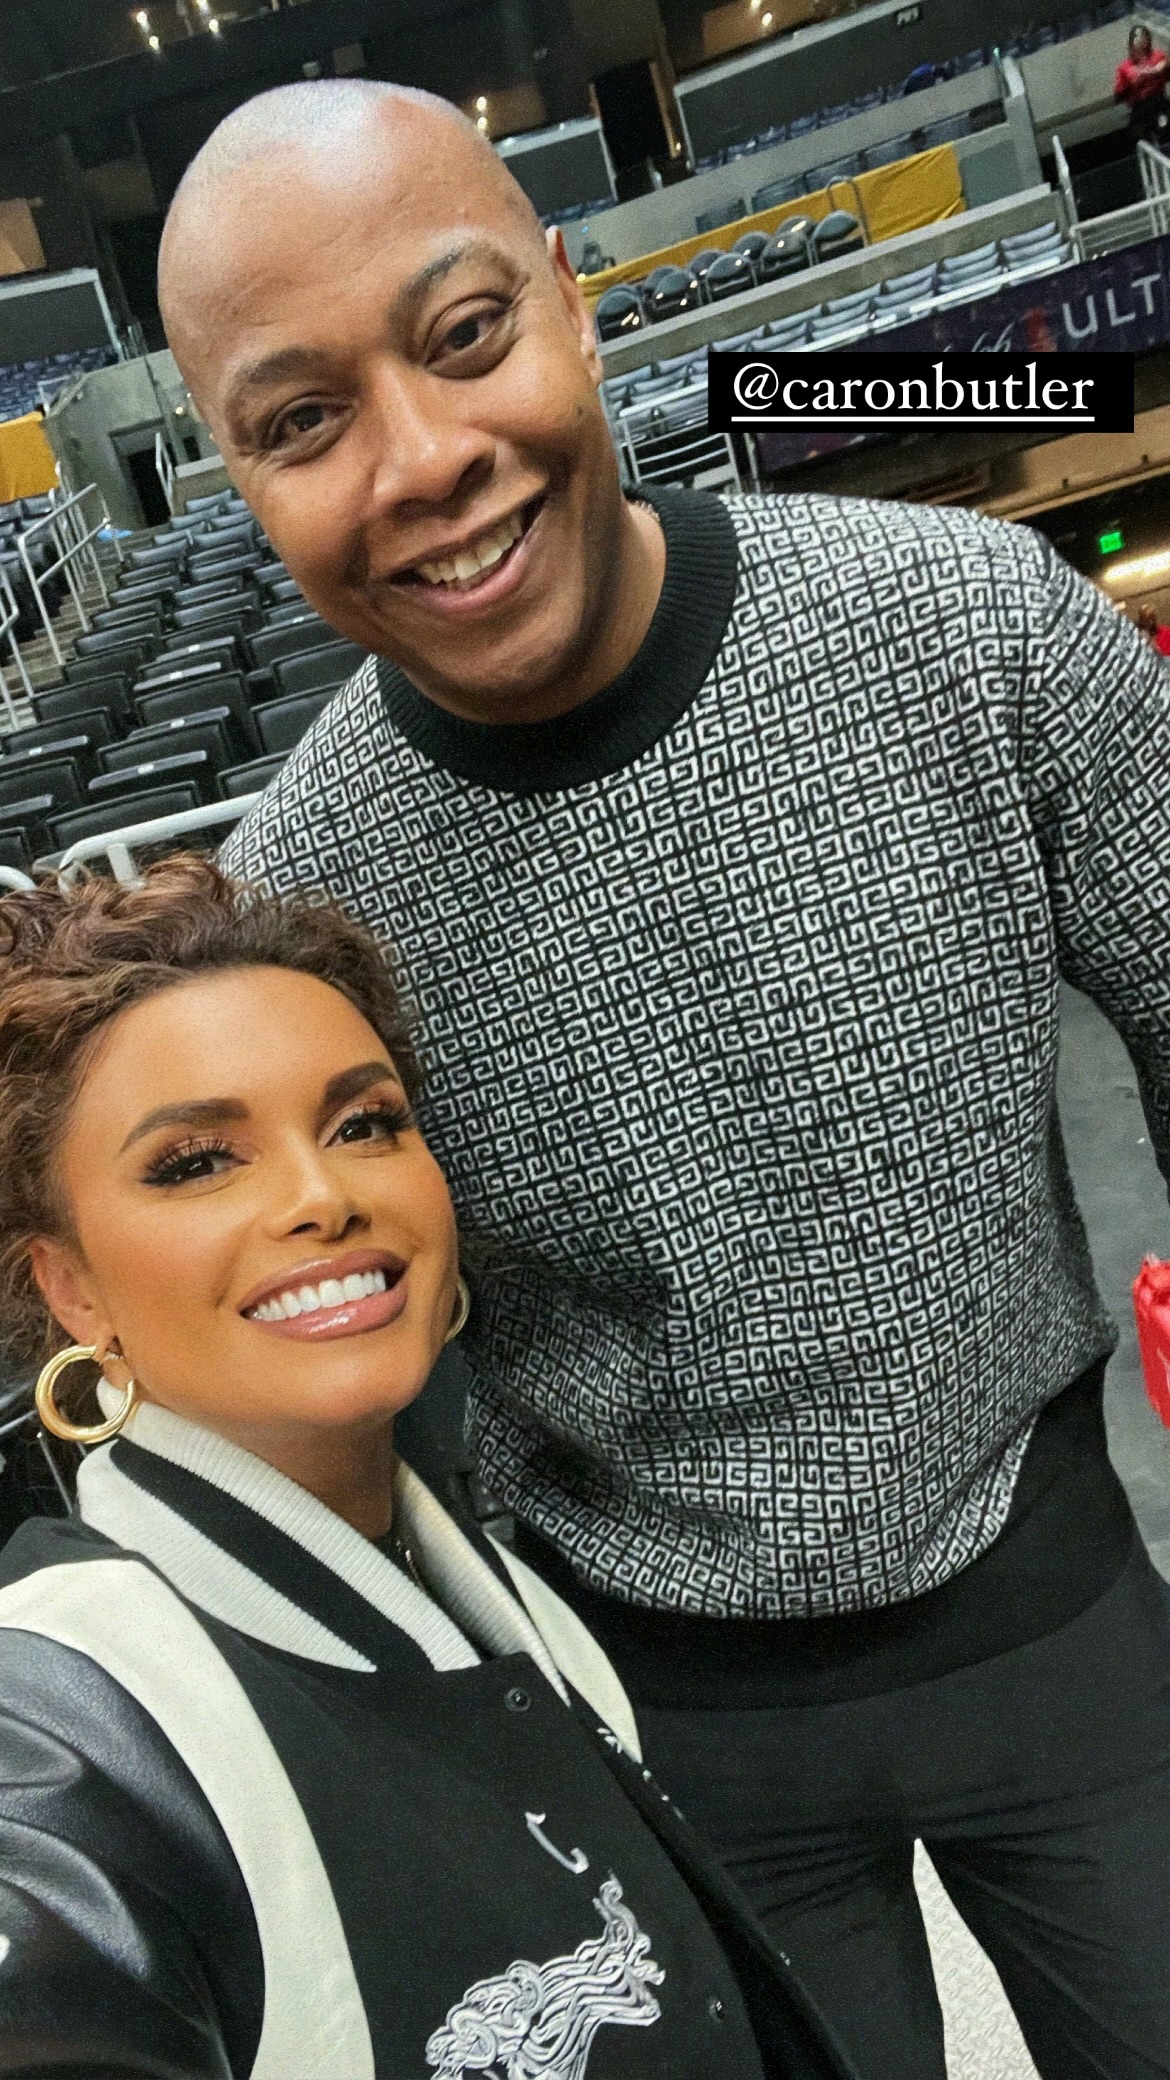 Taylor also took a selfie with former NBA All-Star turned Miami Heat coach Caron Butler